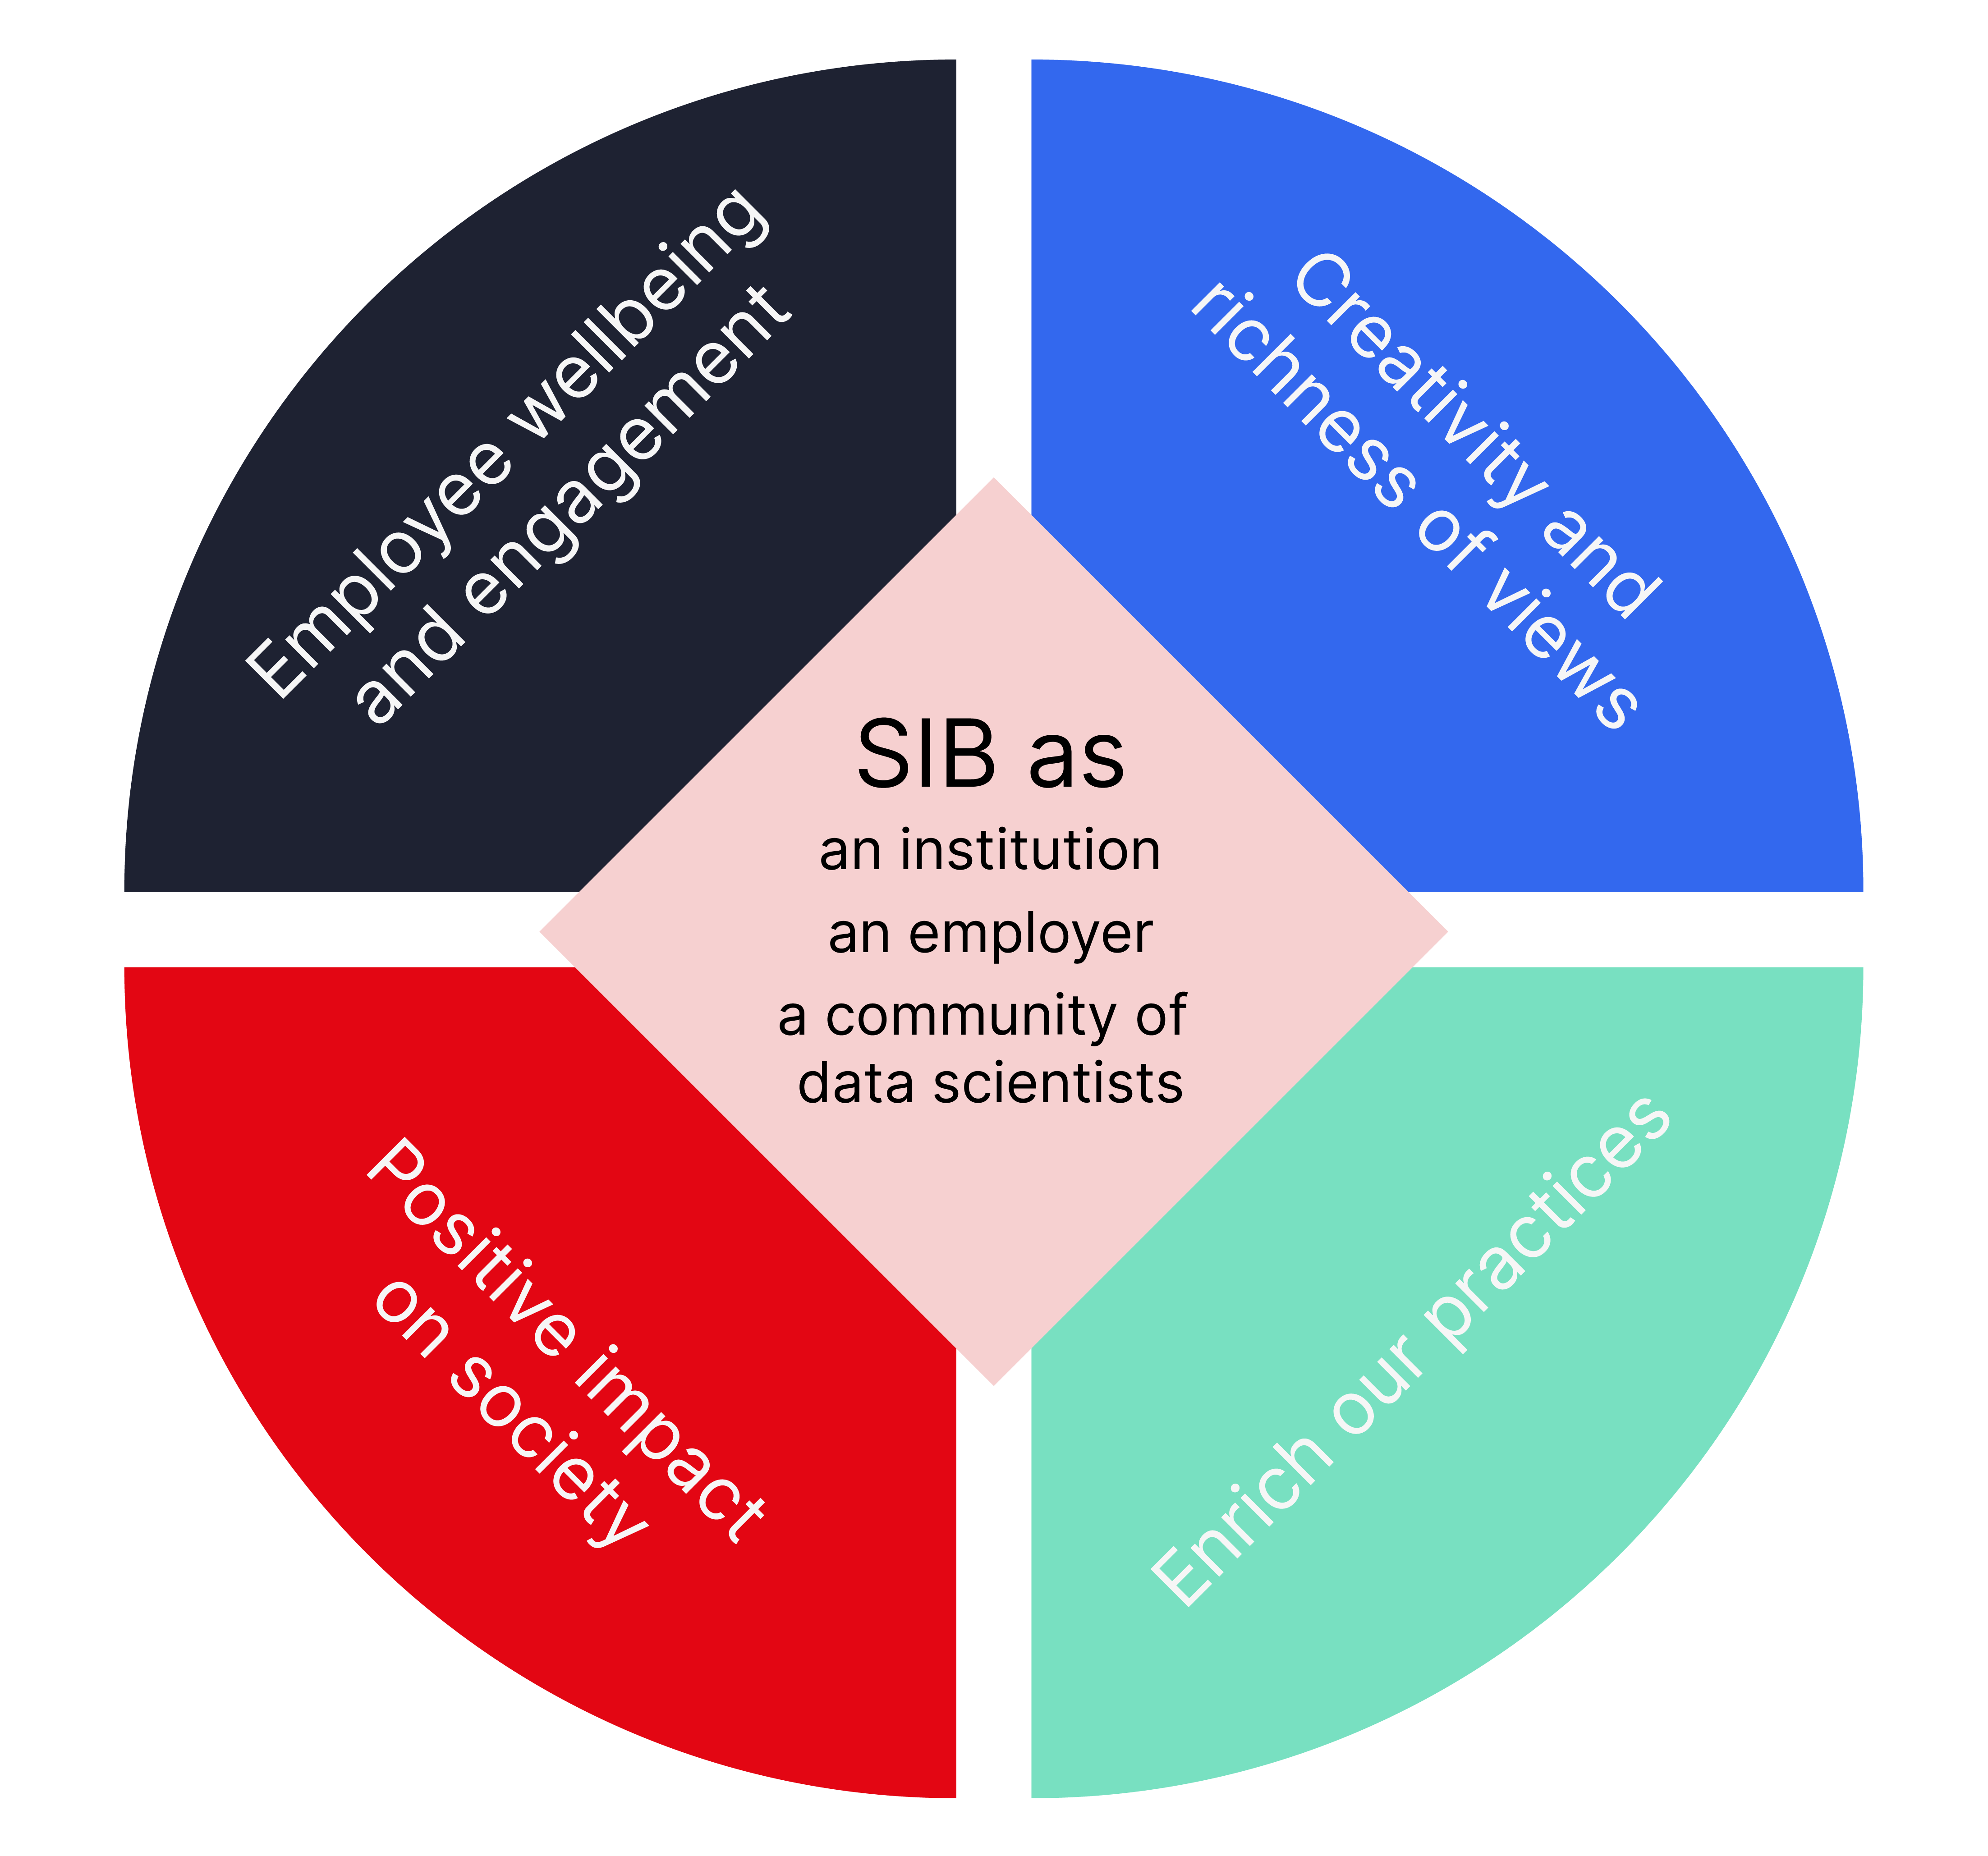 Graph explaining Equality, Diversity, Inclusion at SIB